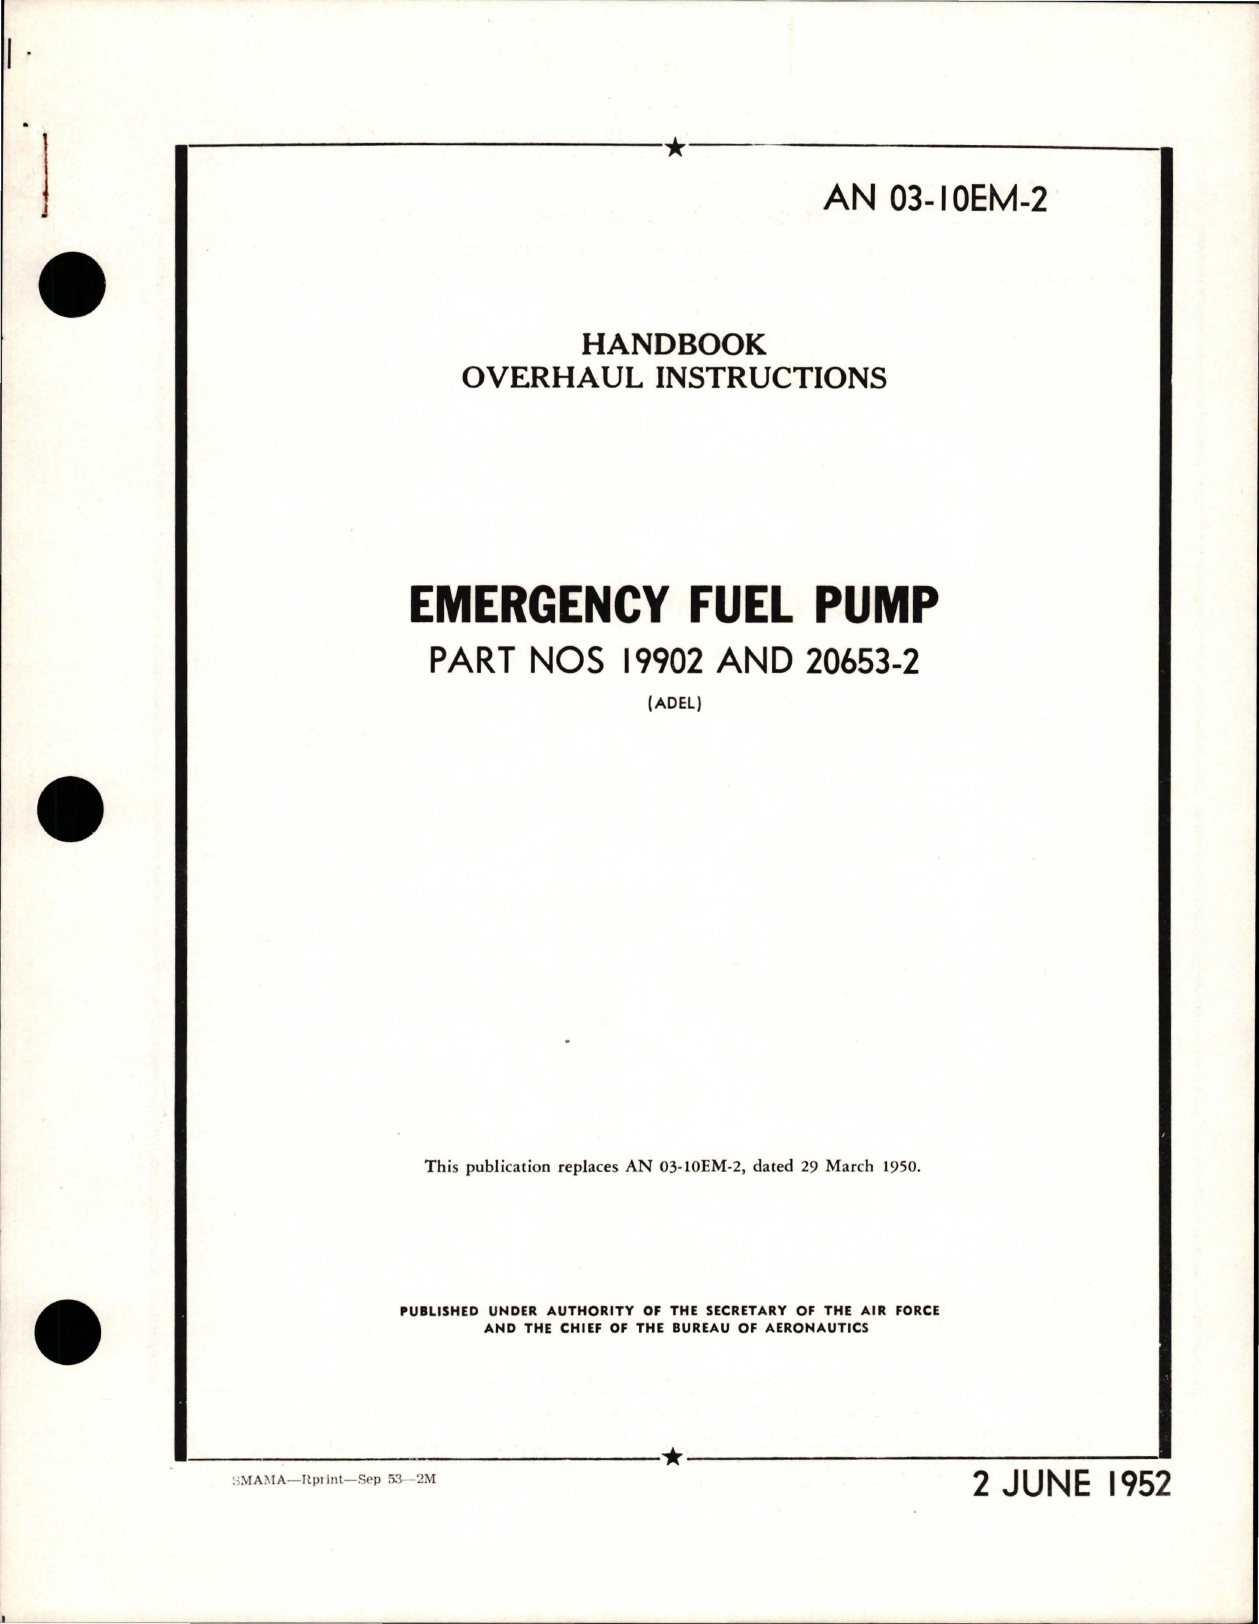 Sample page 1 from AirCorps Library document: Overhaul Instructions for Emergency Fuel Pump - Parts 19902 and 20653-2